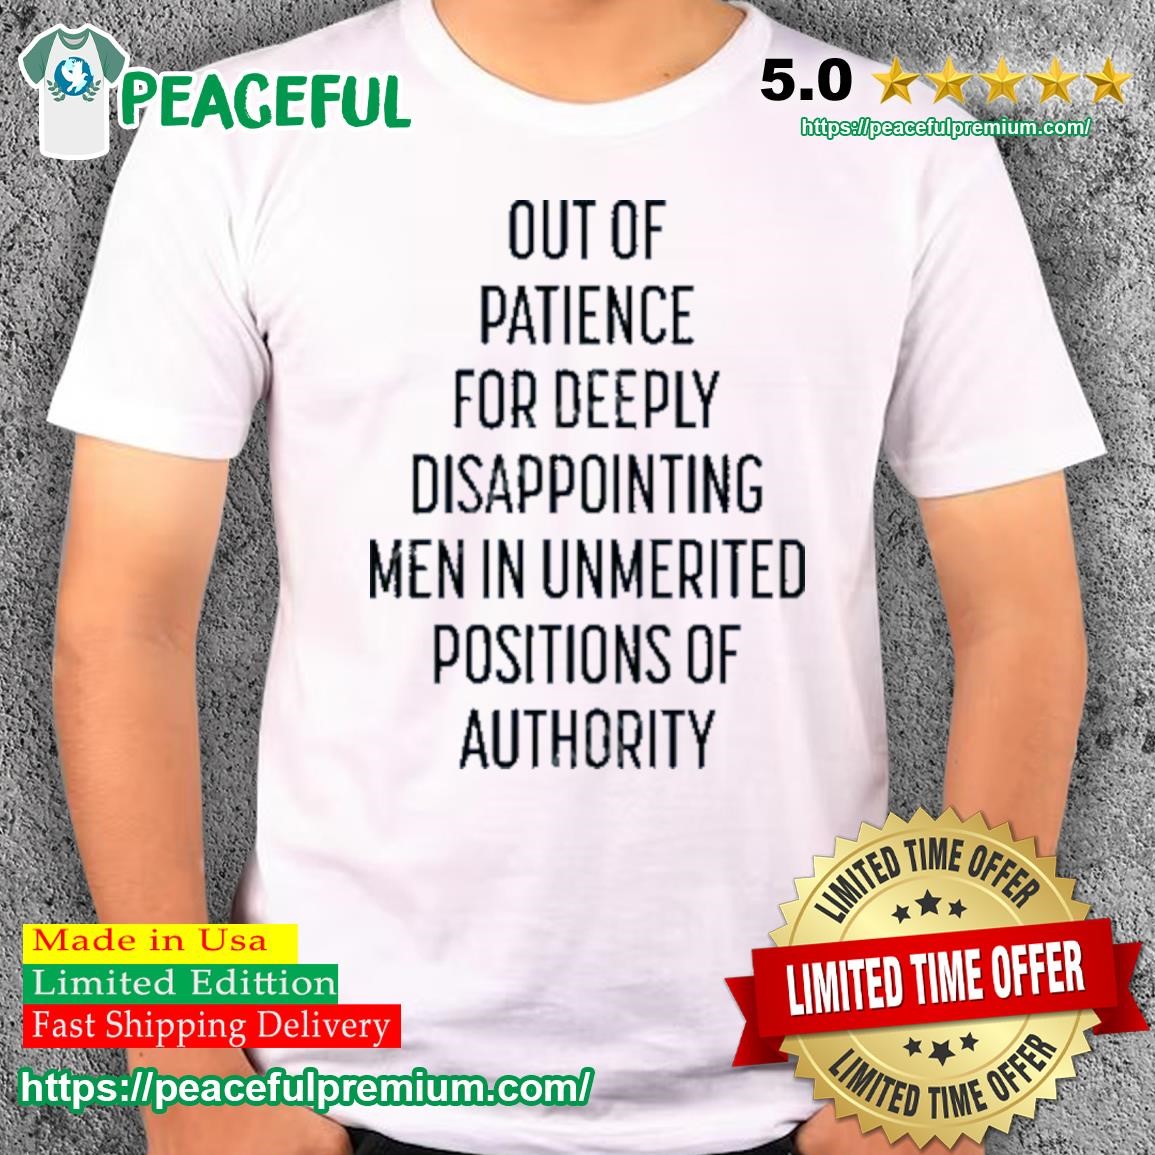 https://images.peacefulpremium.com/2023/05/Kate-Kelly-Out-Of-Patience-For-Deeply-Disappointing-Men-In-Unmerited-Positions-Of-Authority-Shirt-t-shirt.jpg